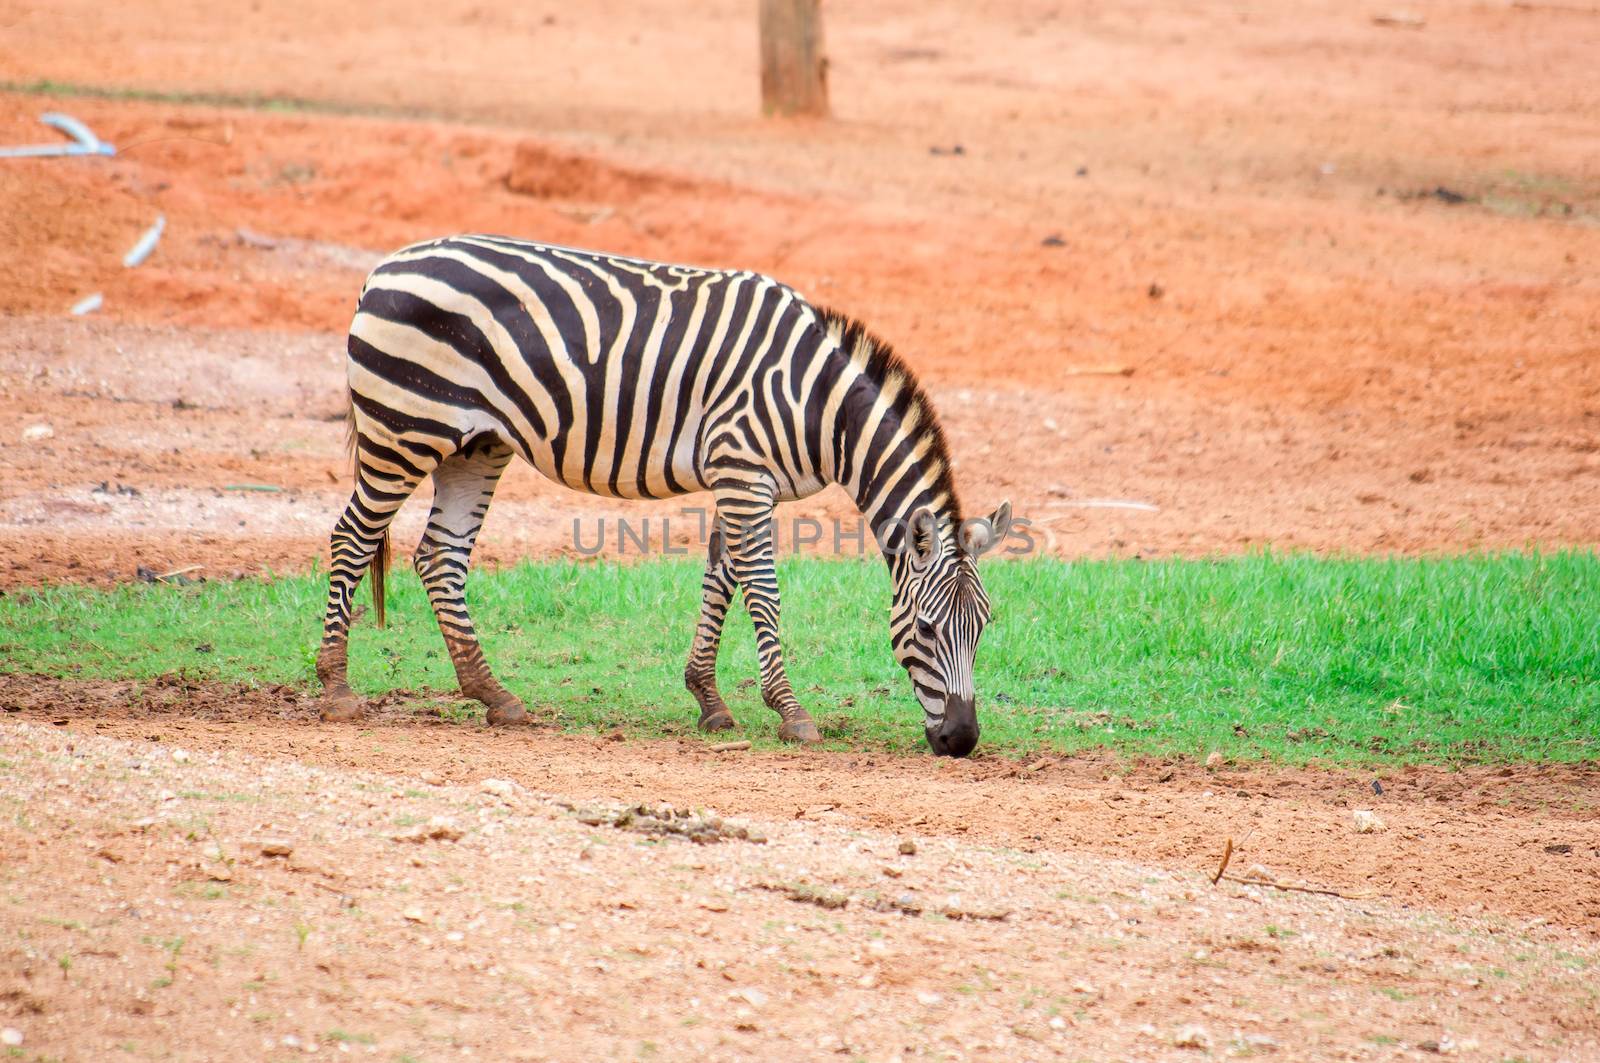 Zebra eating young grass